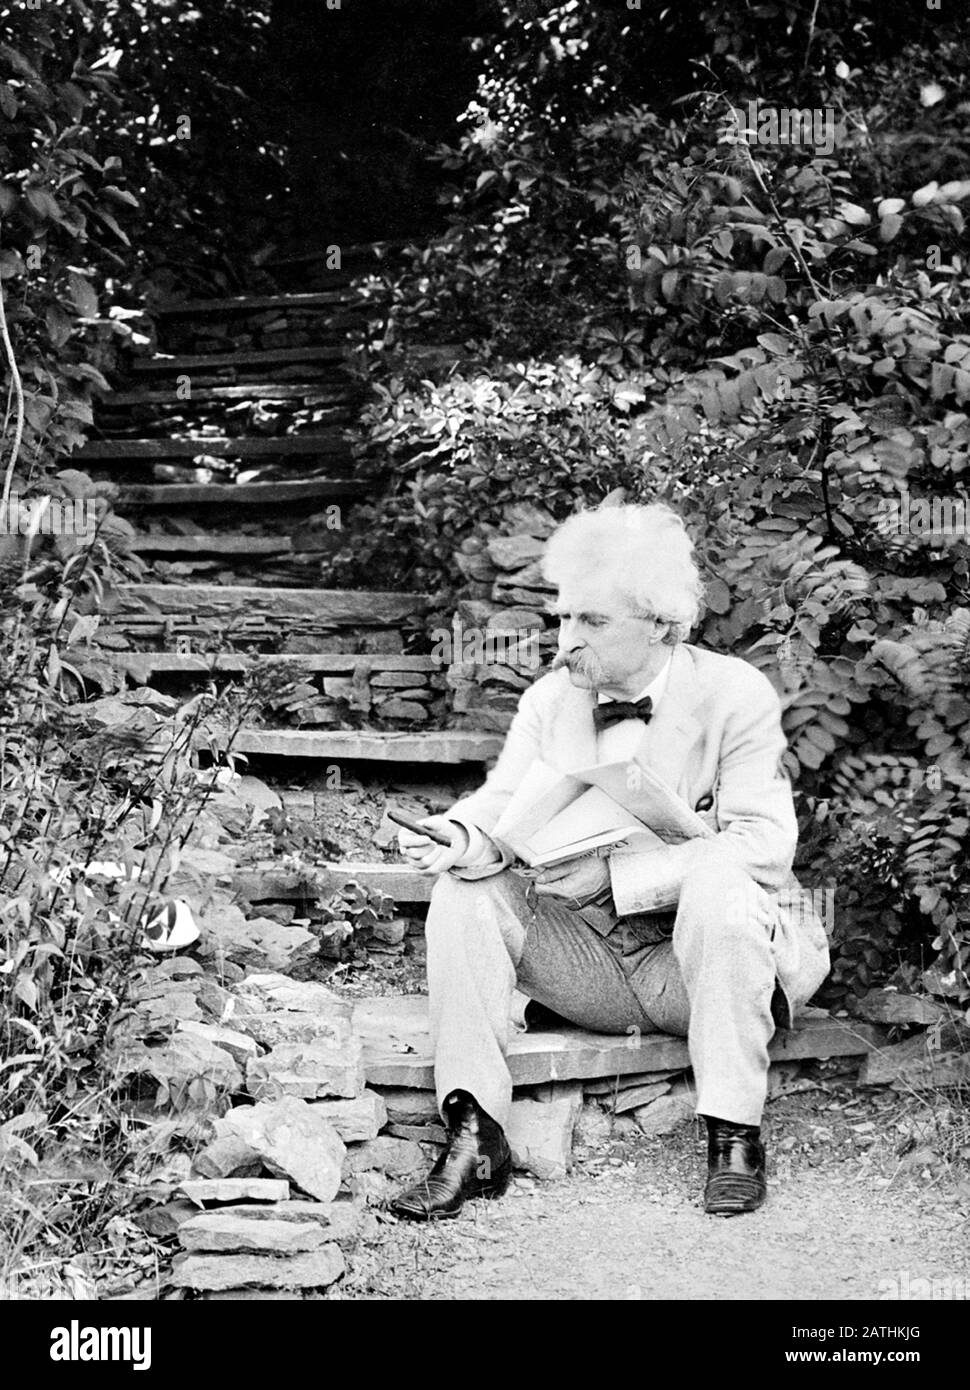 Vintage portrait photo of American writer and humourist Samuel Langhorne Clemens (1835 – 1910), better known by his pen name of Mark Twain. Photo circa 1903 by T E Marr / Curtis Publishing Co. Stock Photo